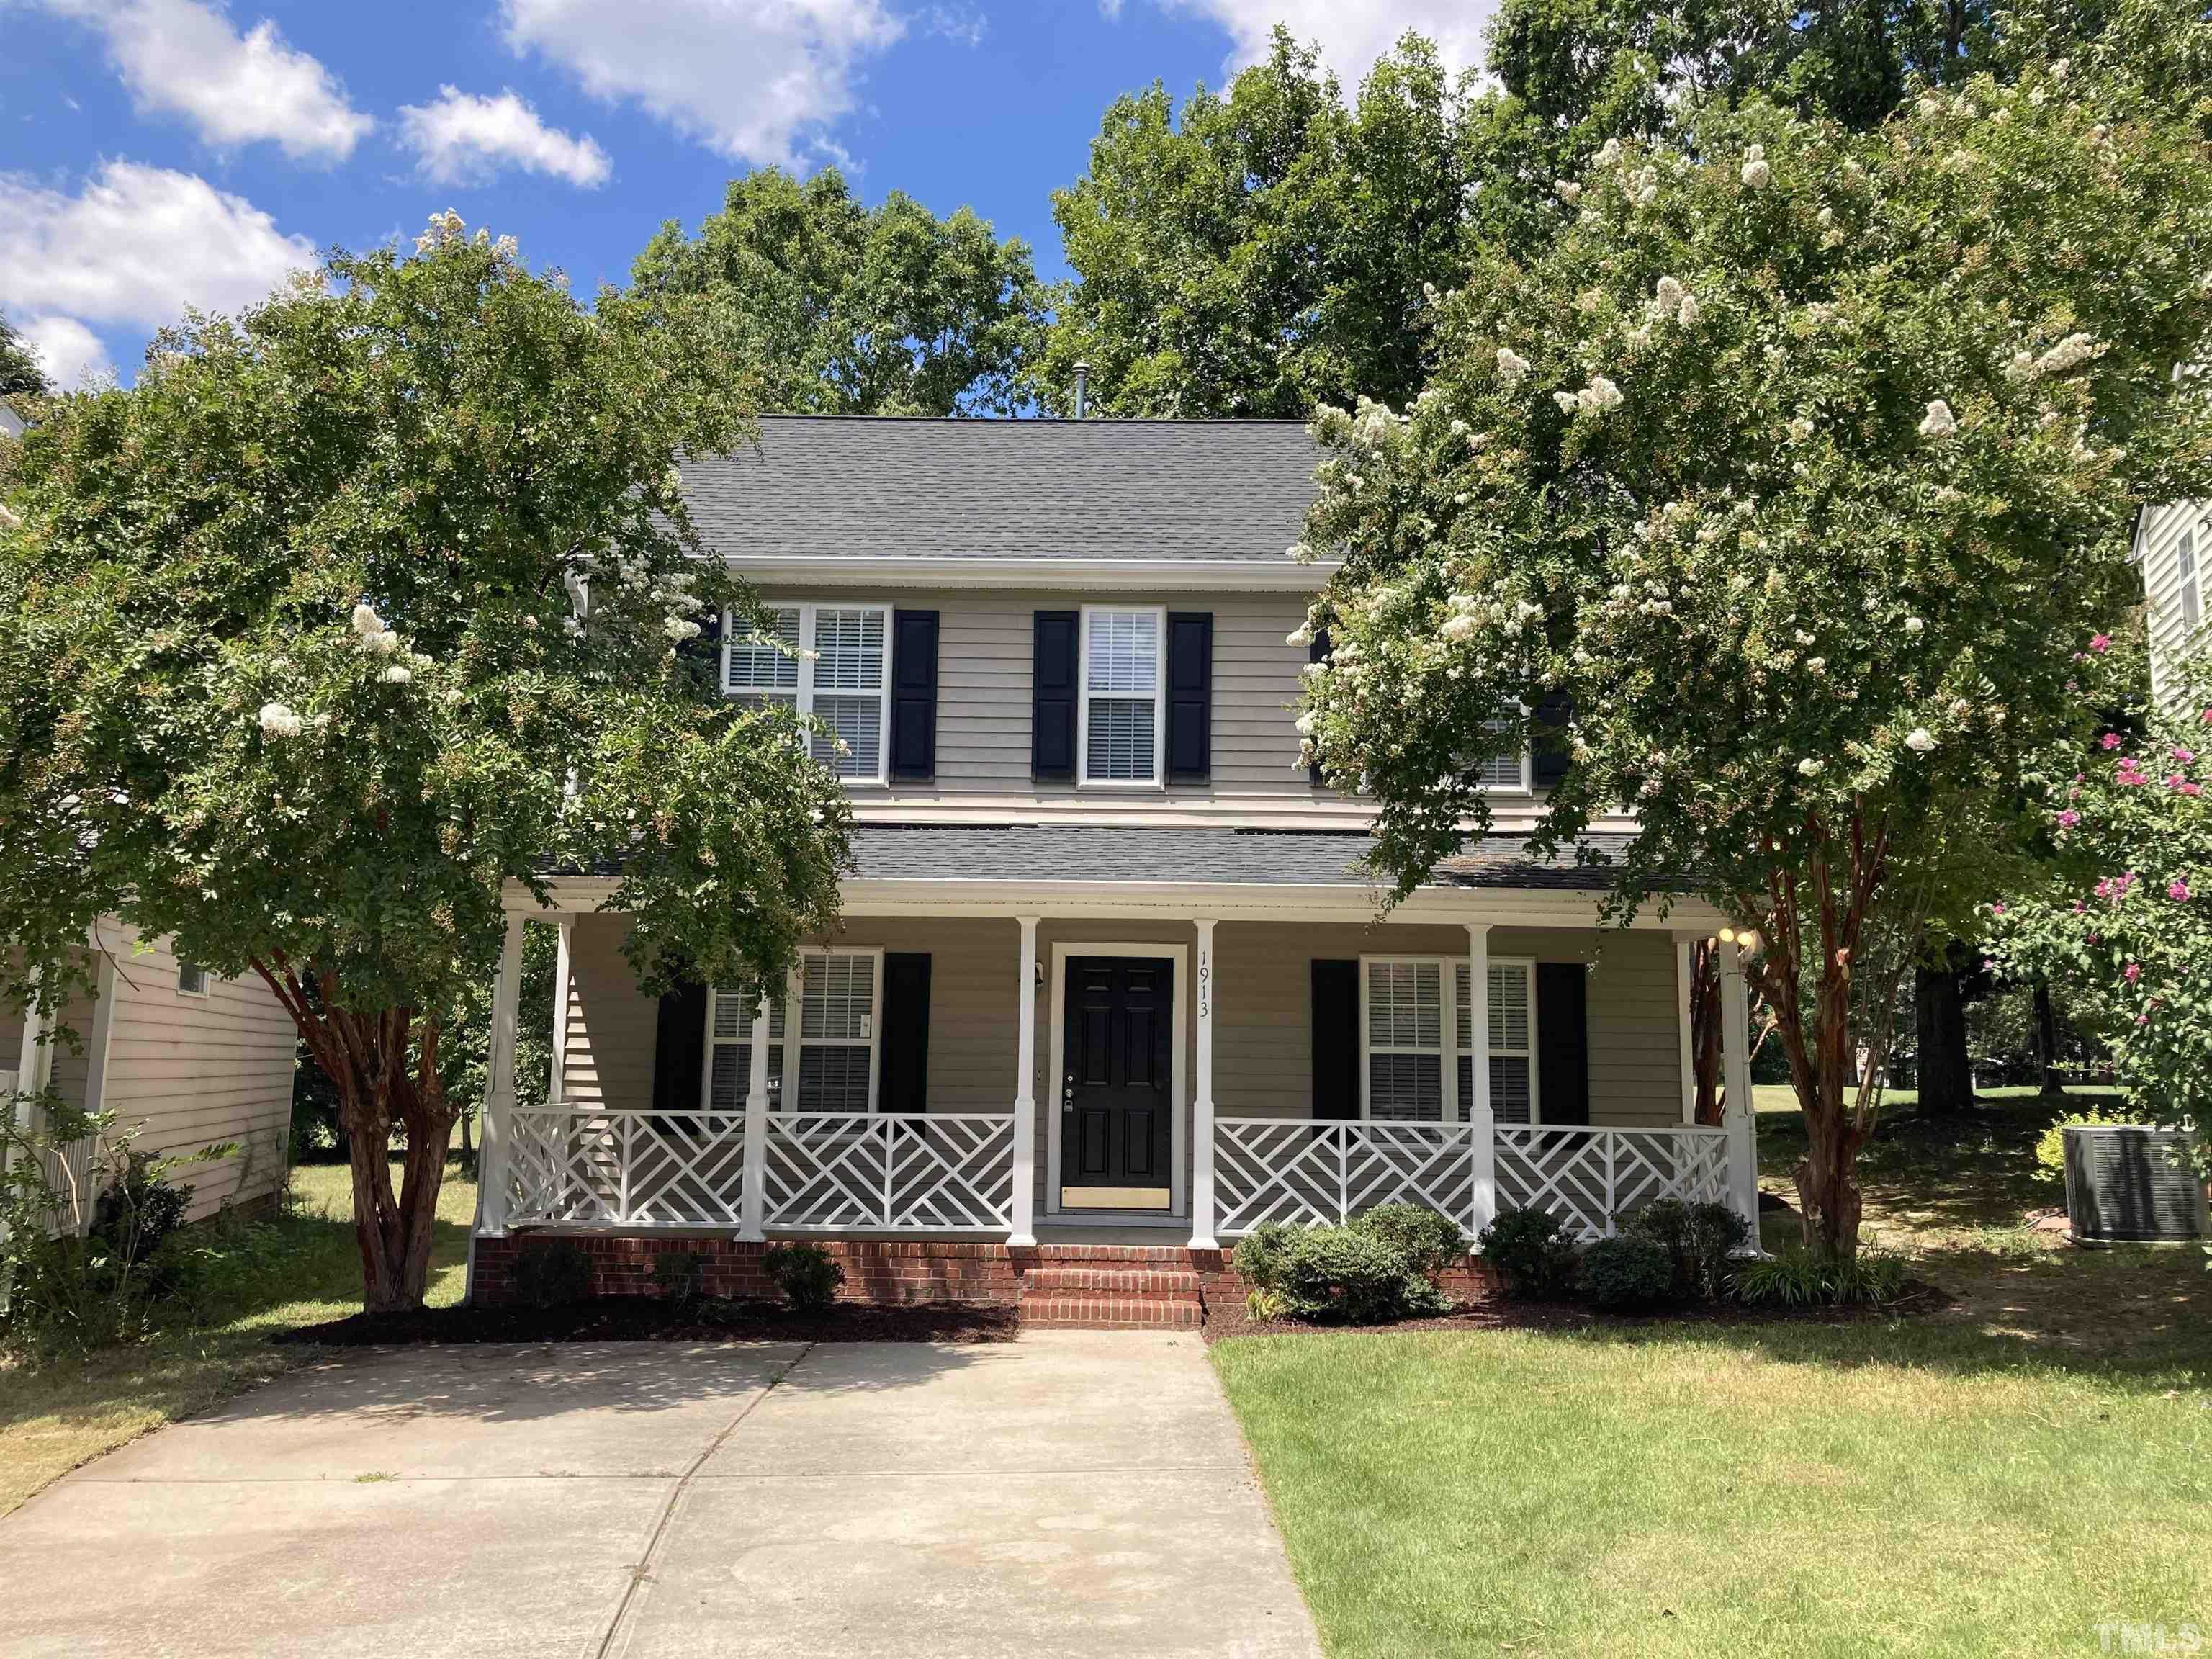 $1,950 - 3Br/3Ba -  for Sale in Hedingham, Raleigh